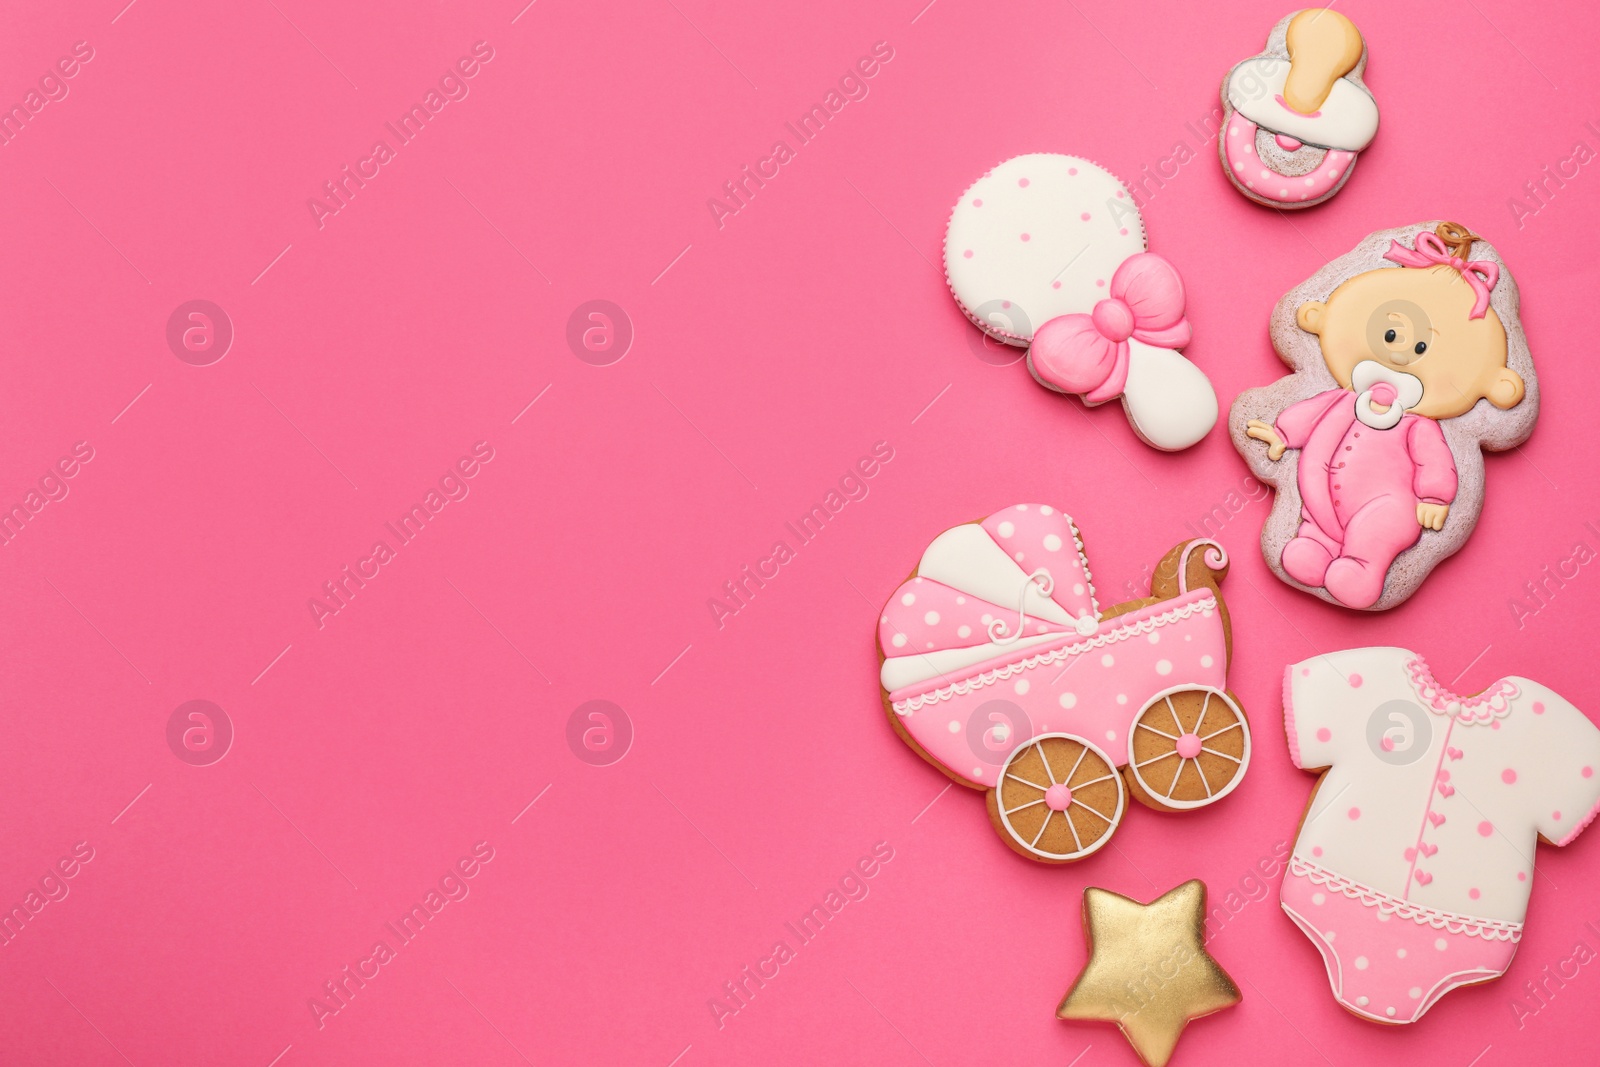 Photo of Cute tasty cookies of different shapes on pink background, flat lay with space for text. Baby shower party